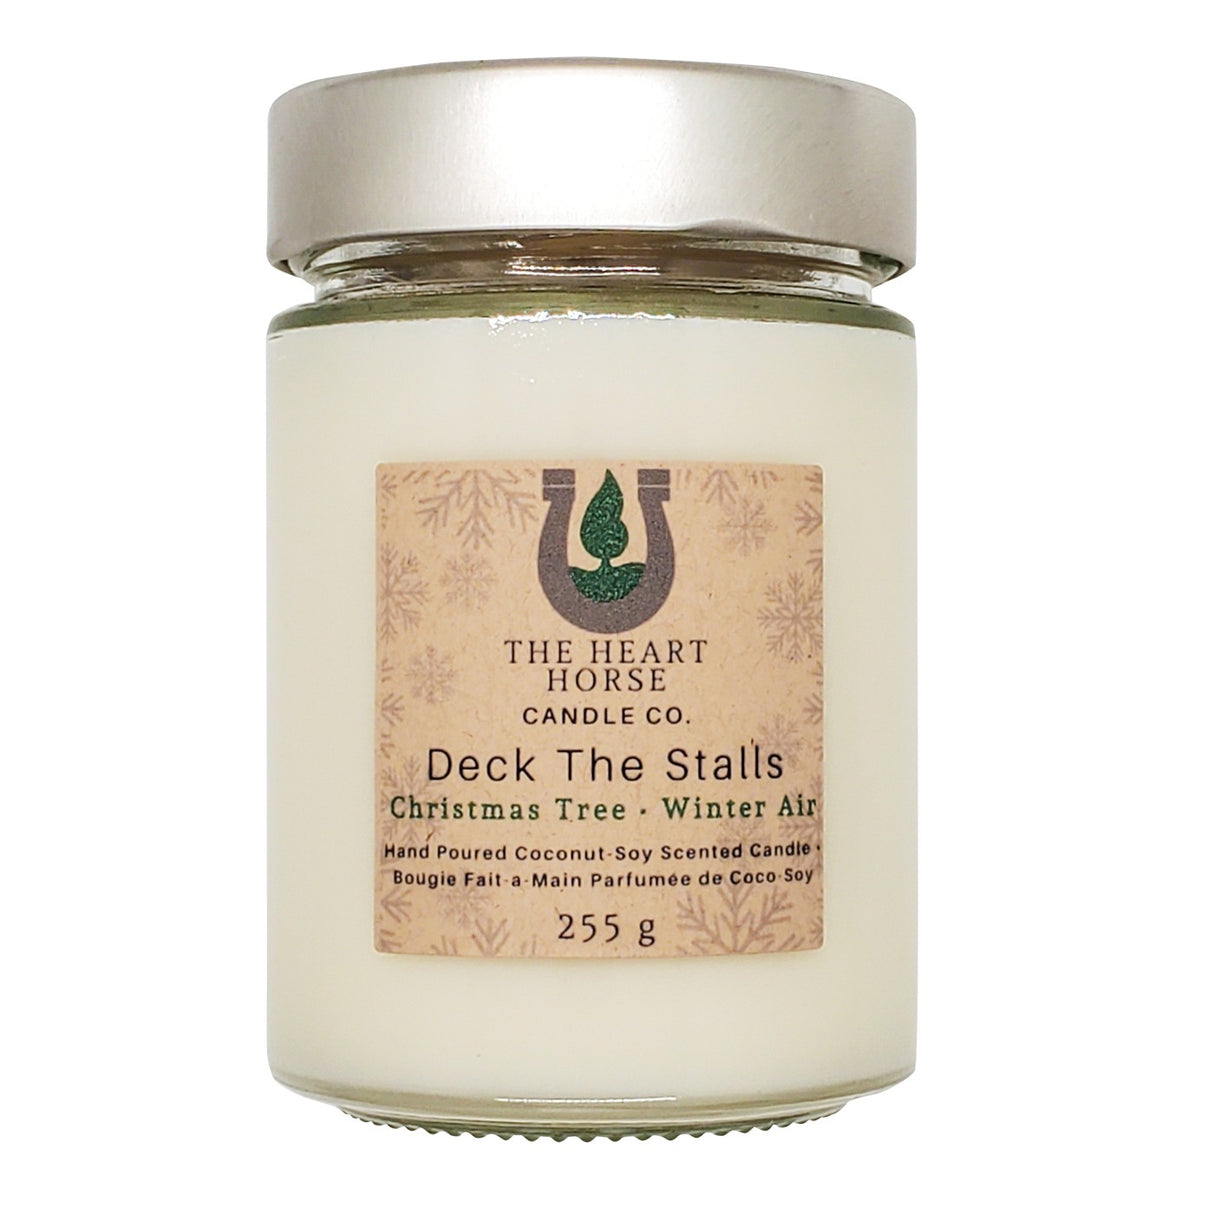 The Heart Horse Candle Co. Deck The Stalls Candle